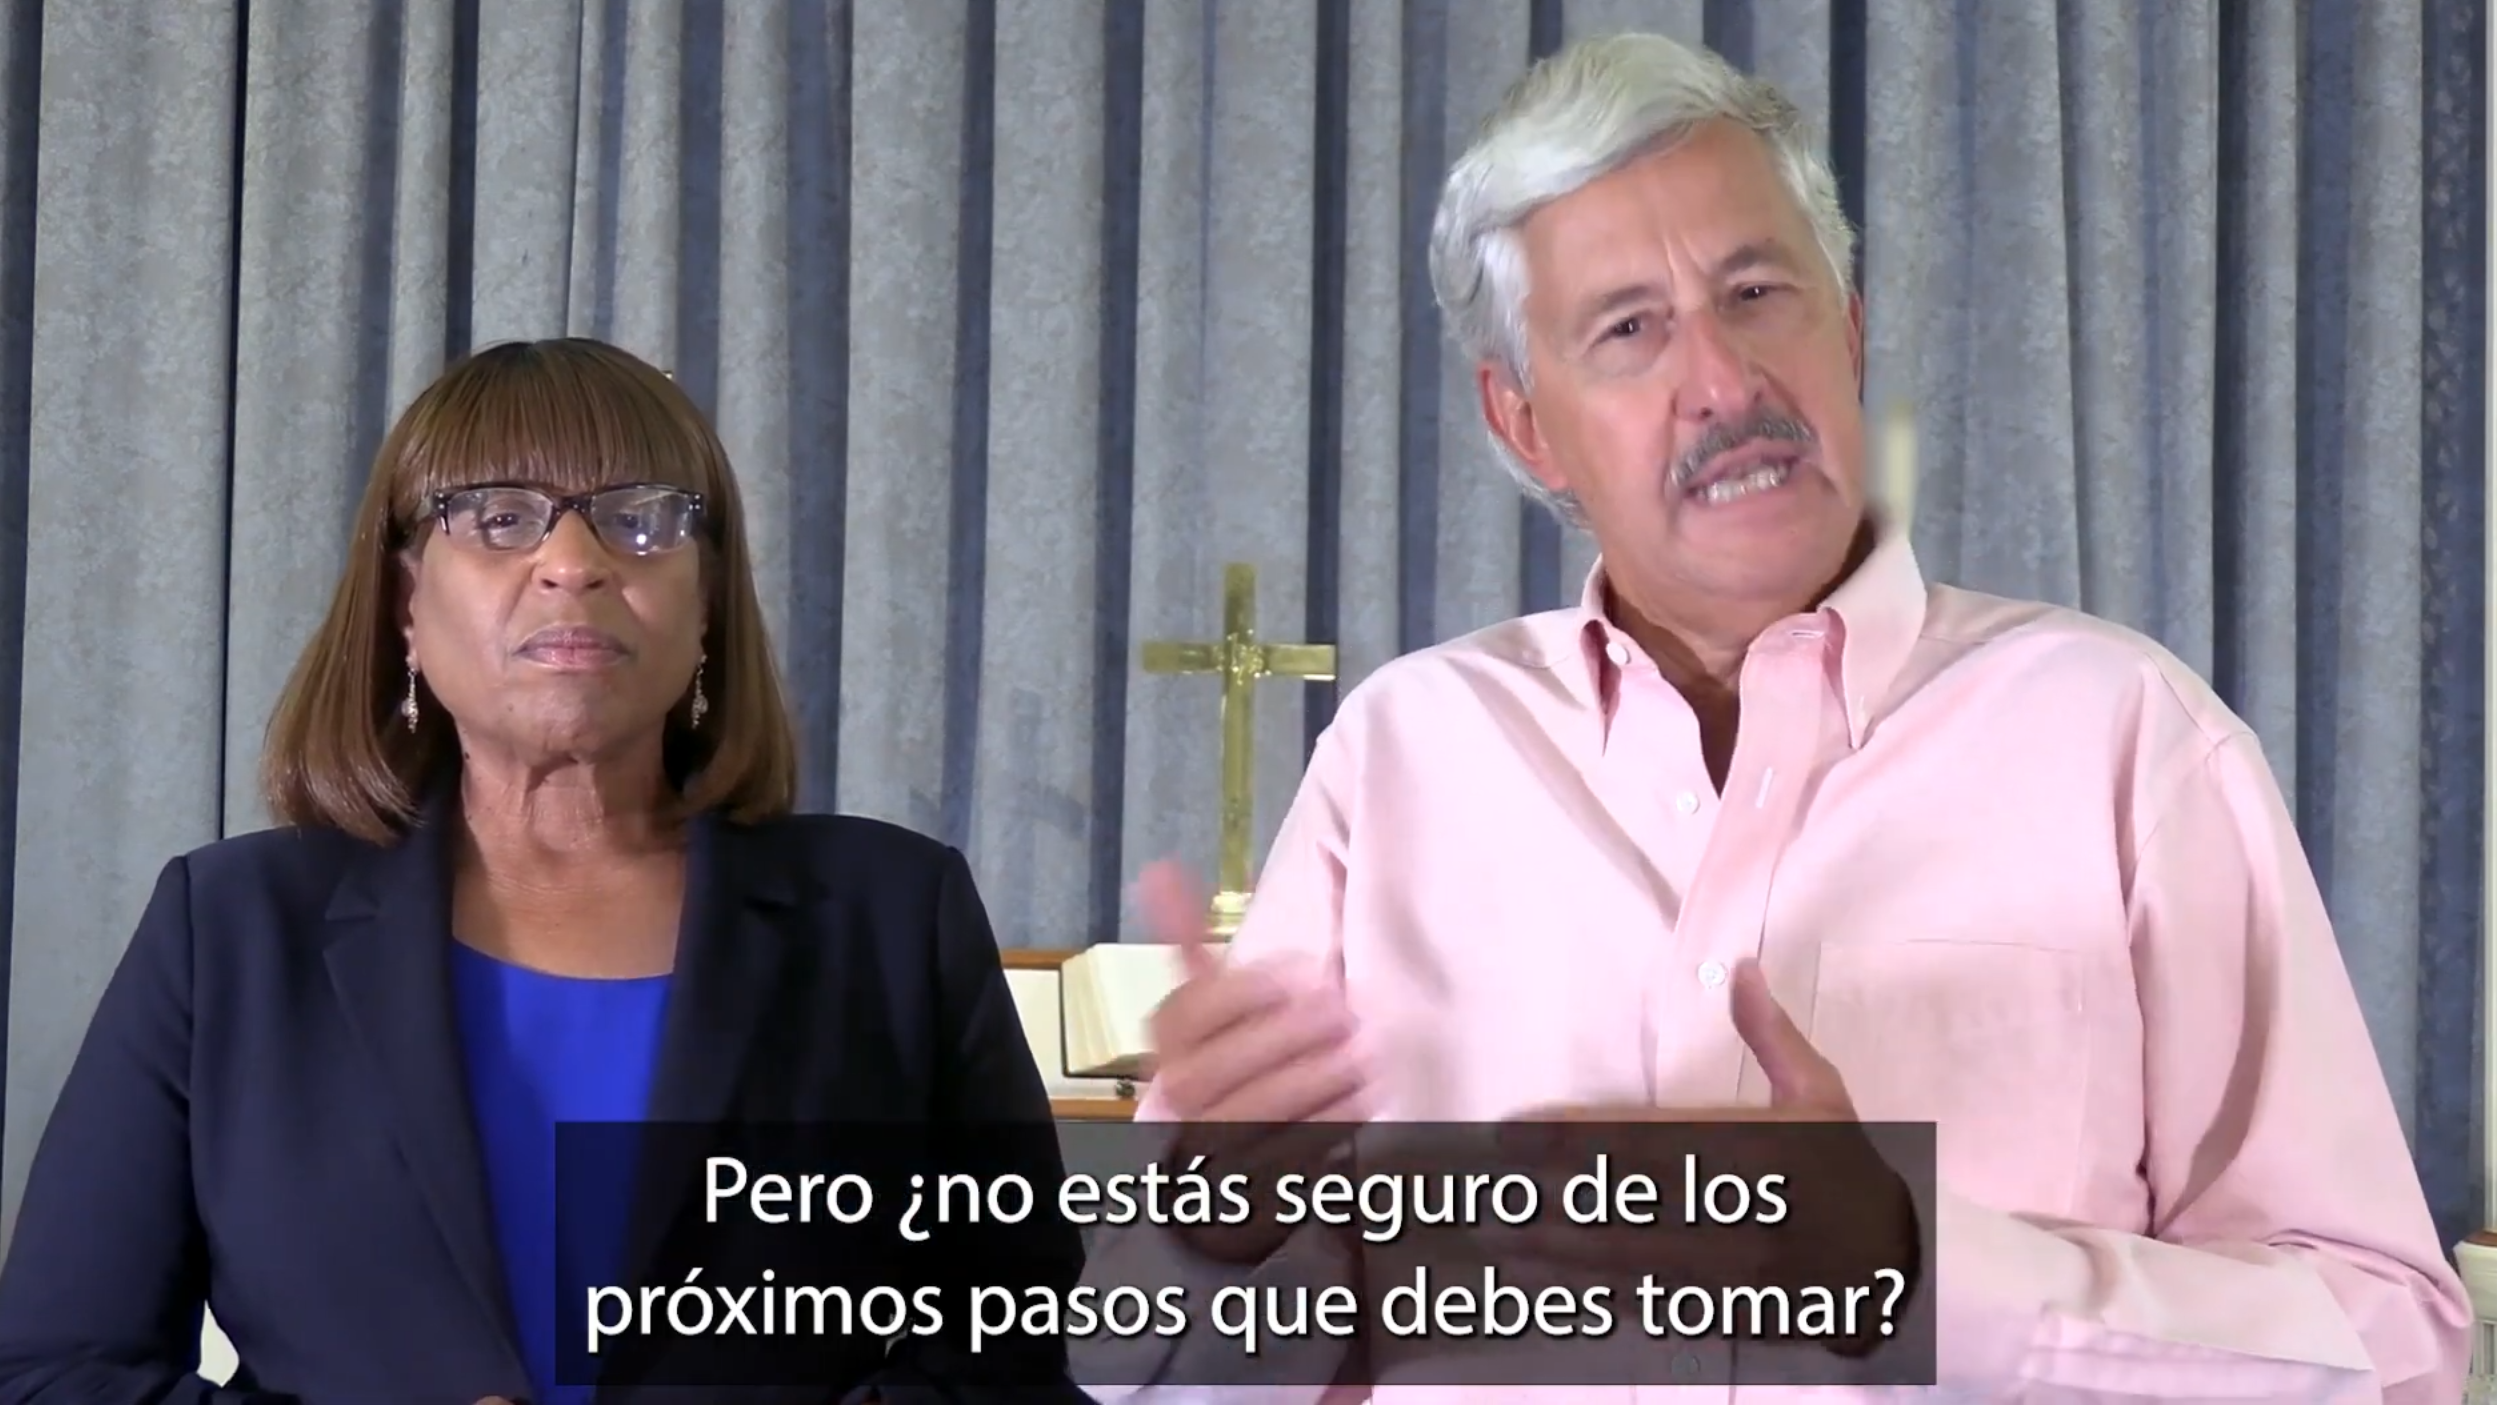 Featured image for “Pathways video now subtitled in Spanish”